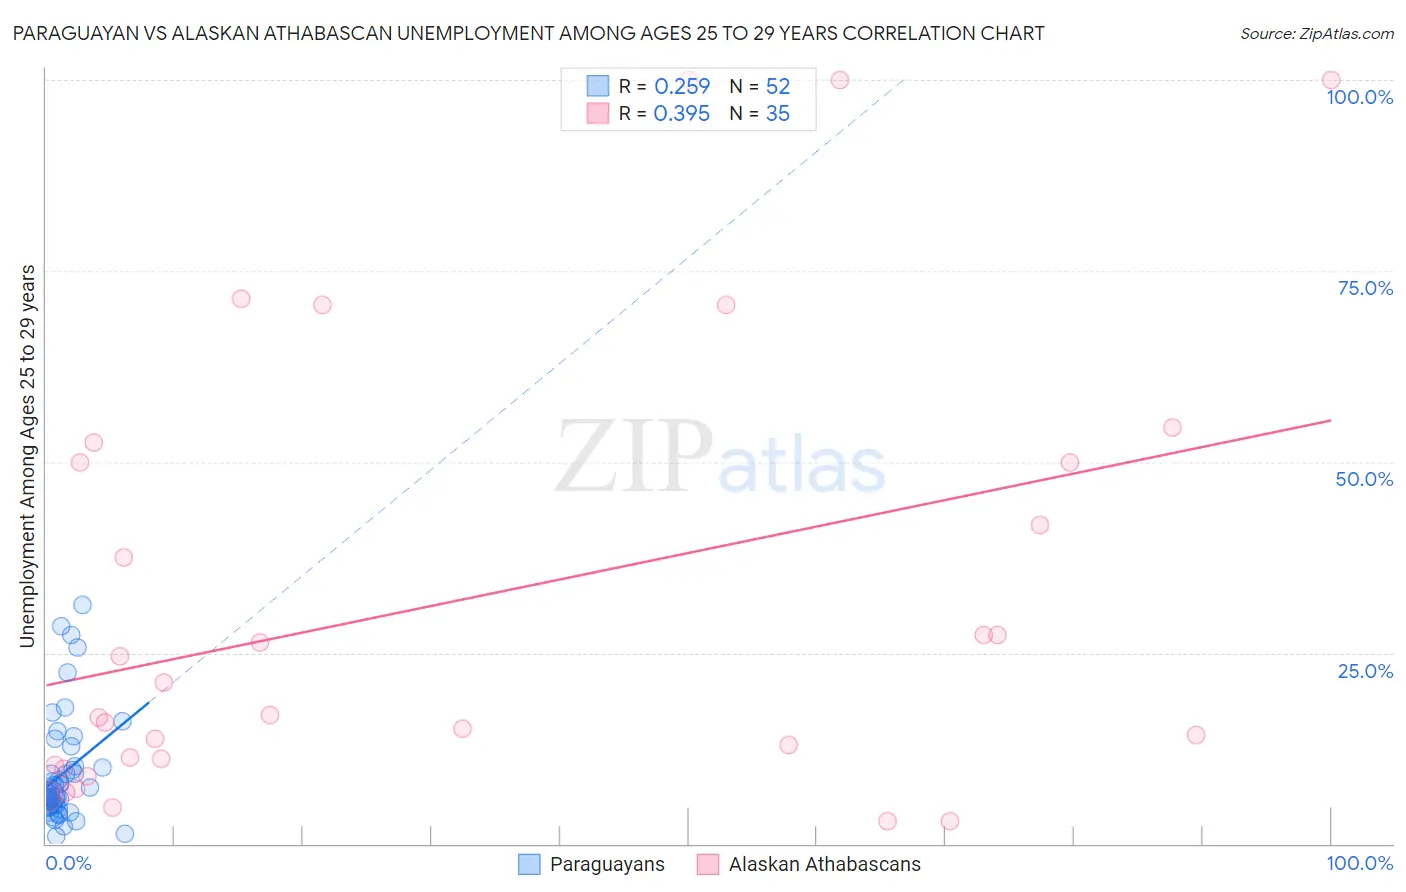 Paraguayan vs Alaskan Athabascan Unemployment Among Ages 25 to 29 years